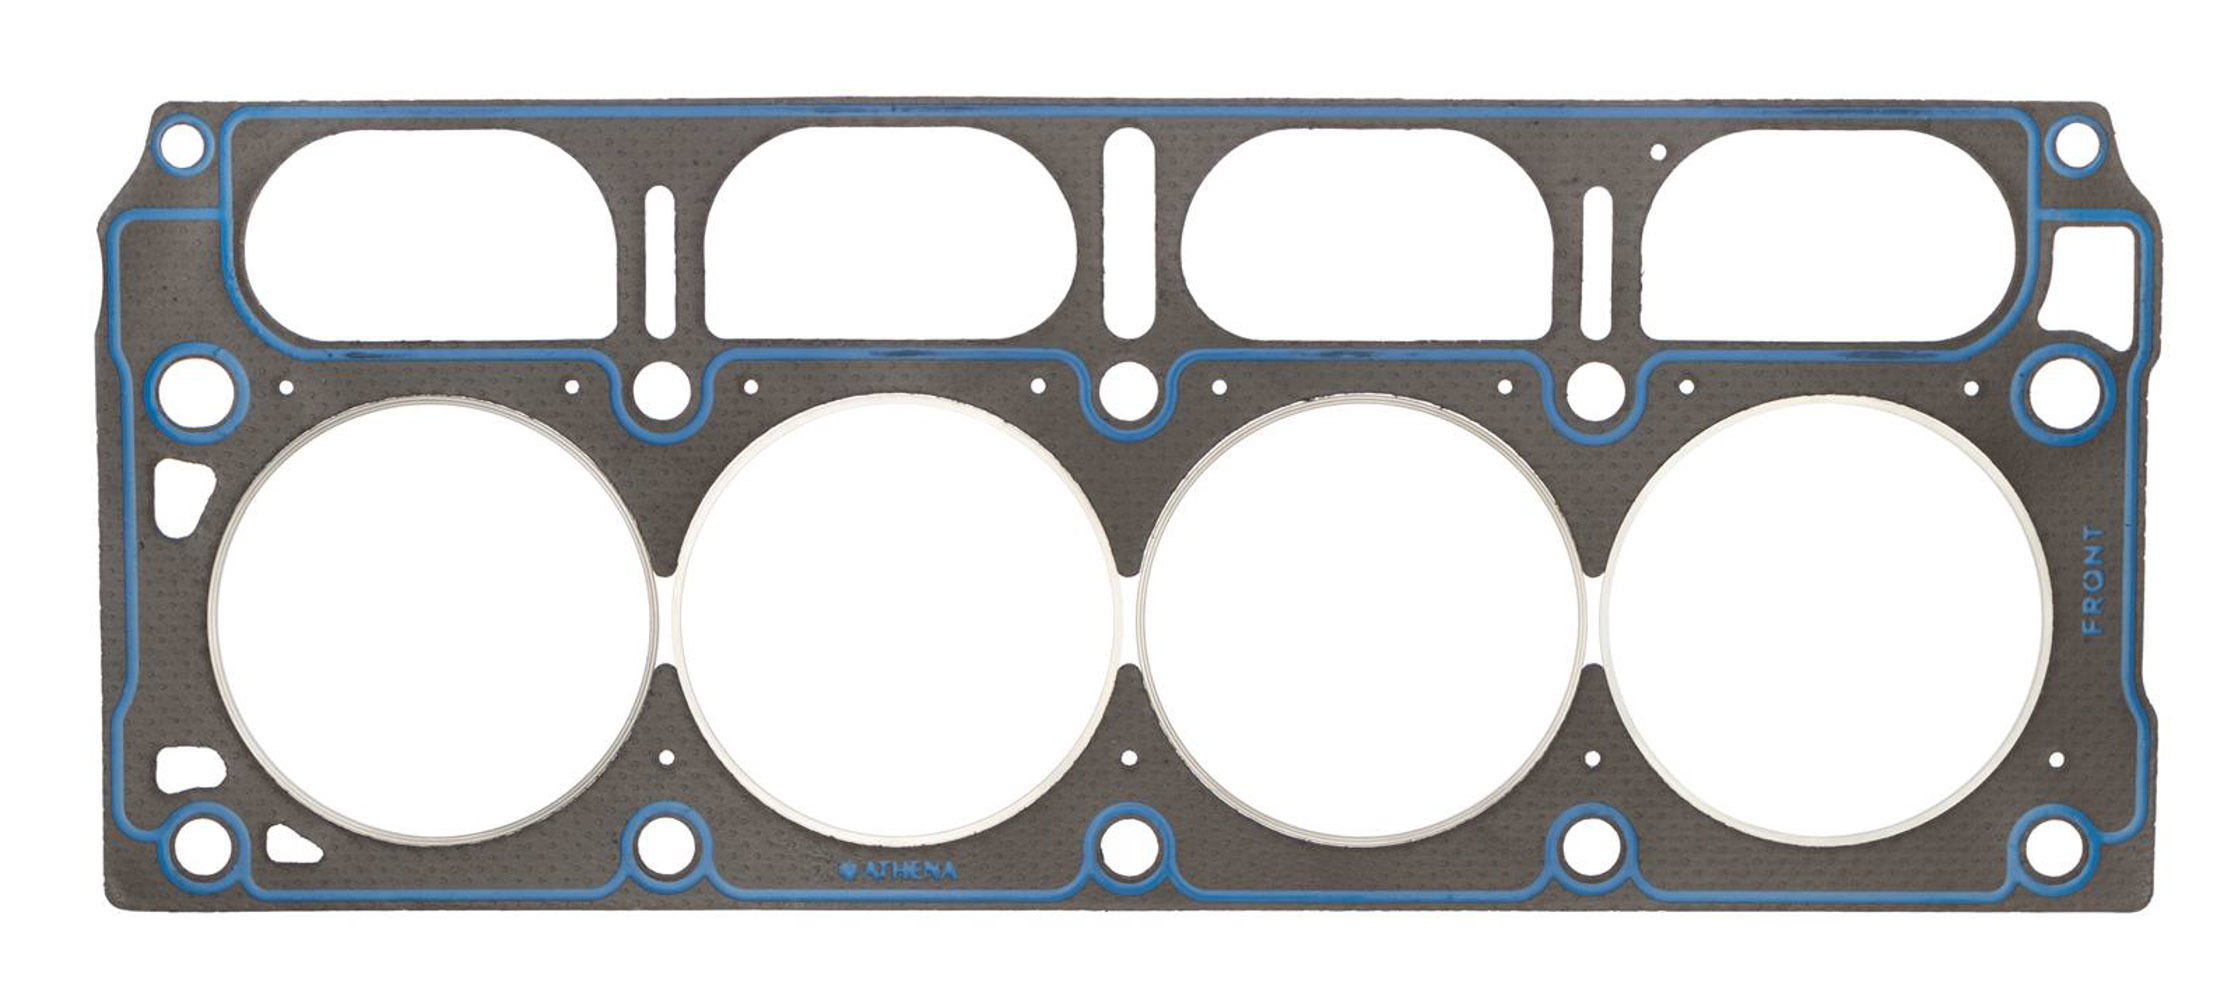 SCE Gaskets CR271055 - Cylinder Head Gasket, Vulcan Cut Ring, 4.100 in Bore, 0.055 in Compression Thickness, Steel Core Laminate, GM LT-Series, Each